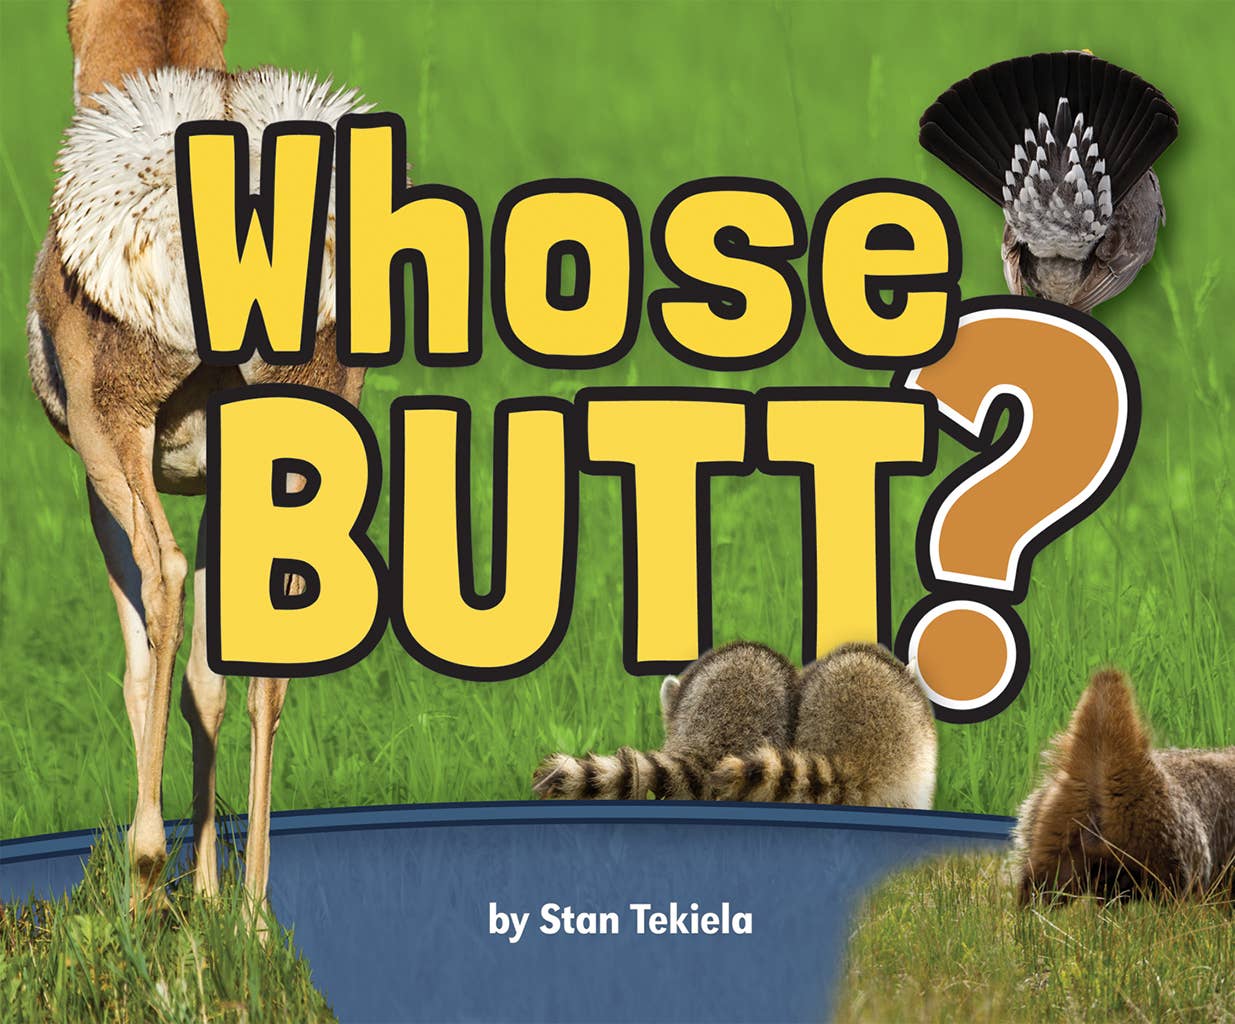 An educational book for kids called "Whose Butt?" about animal butts.